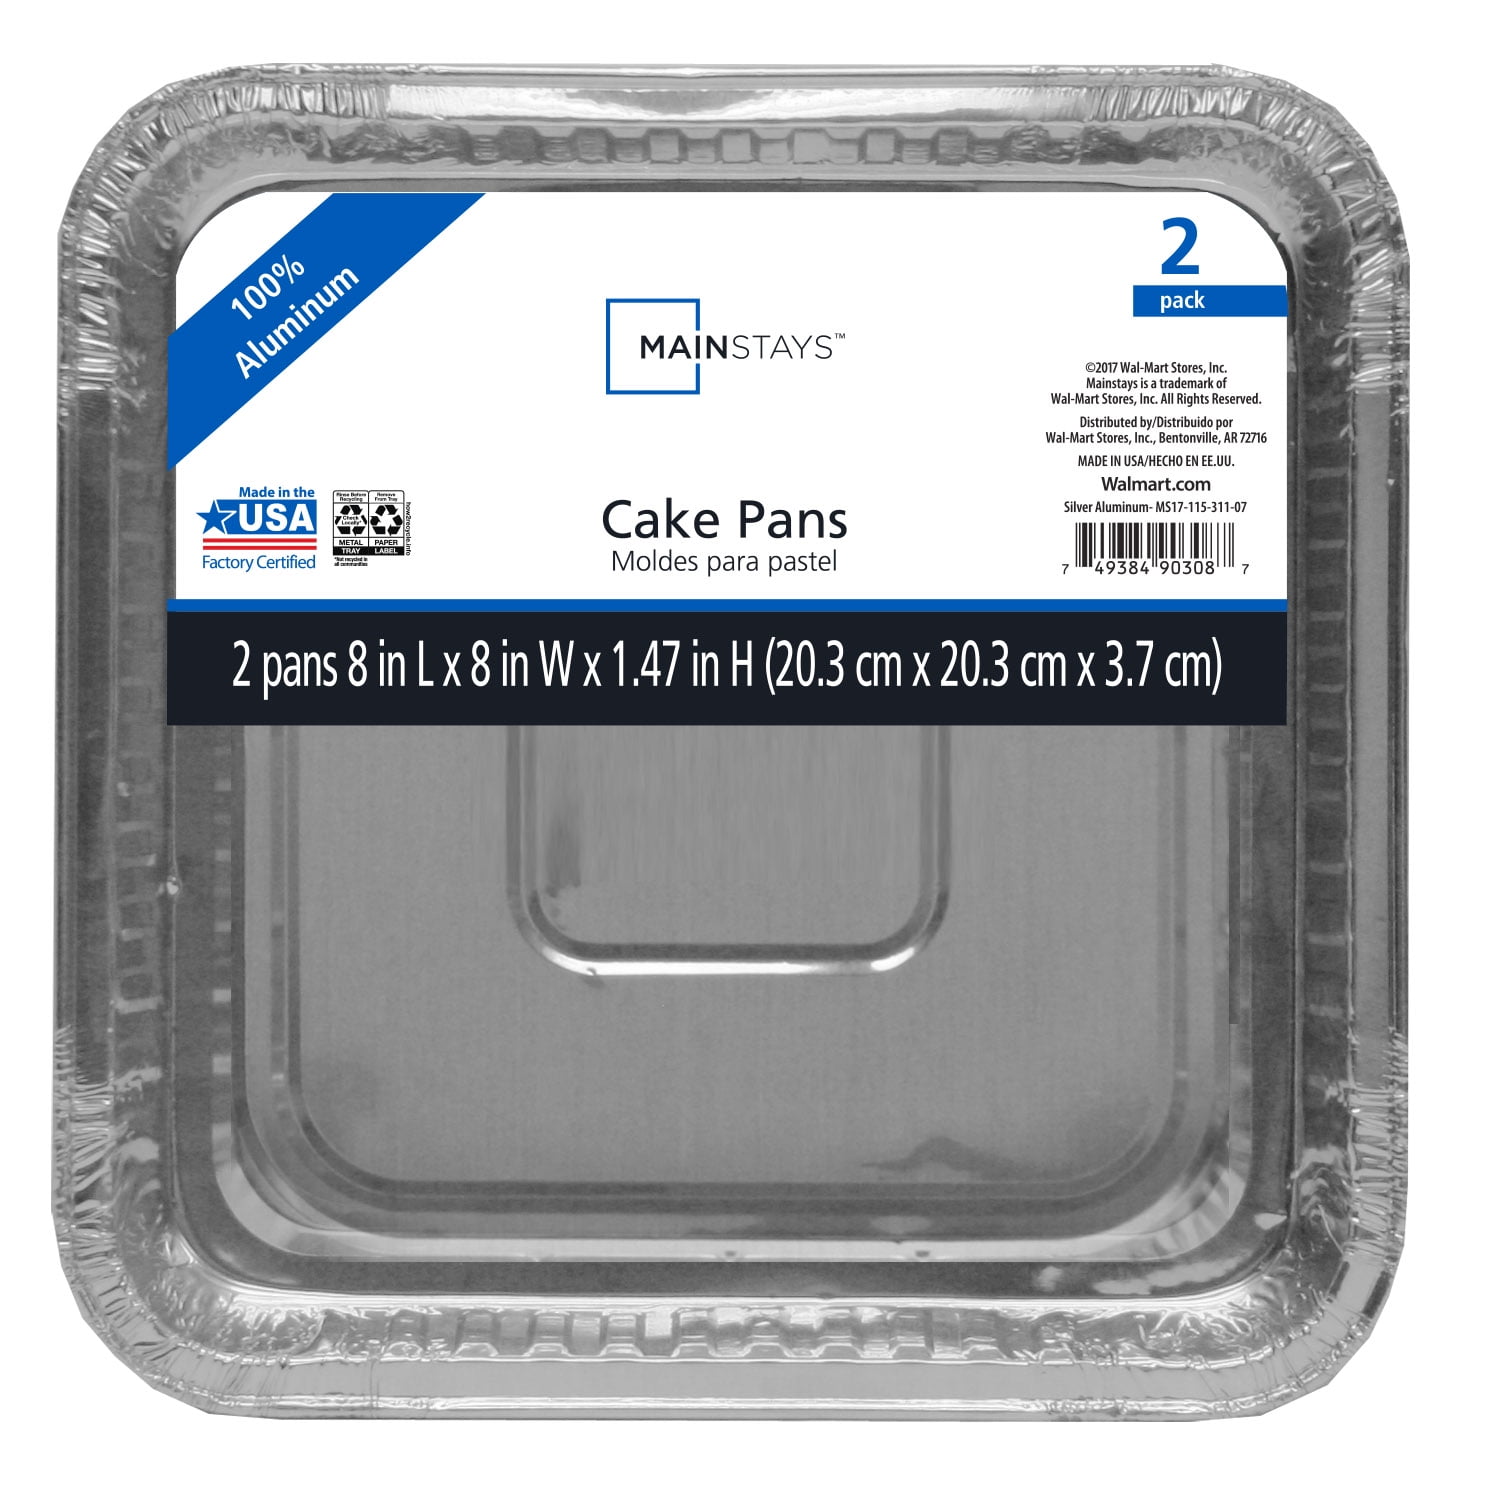 E-far 9 Inch Square Cake Pan with lid, 9x9 Baking Brownie Pans Stainle —  CHIMIYA